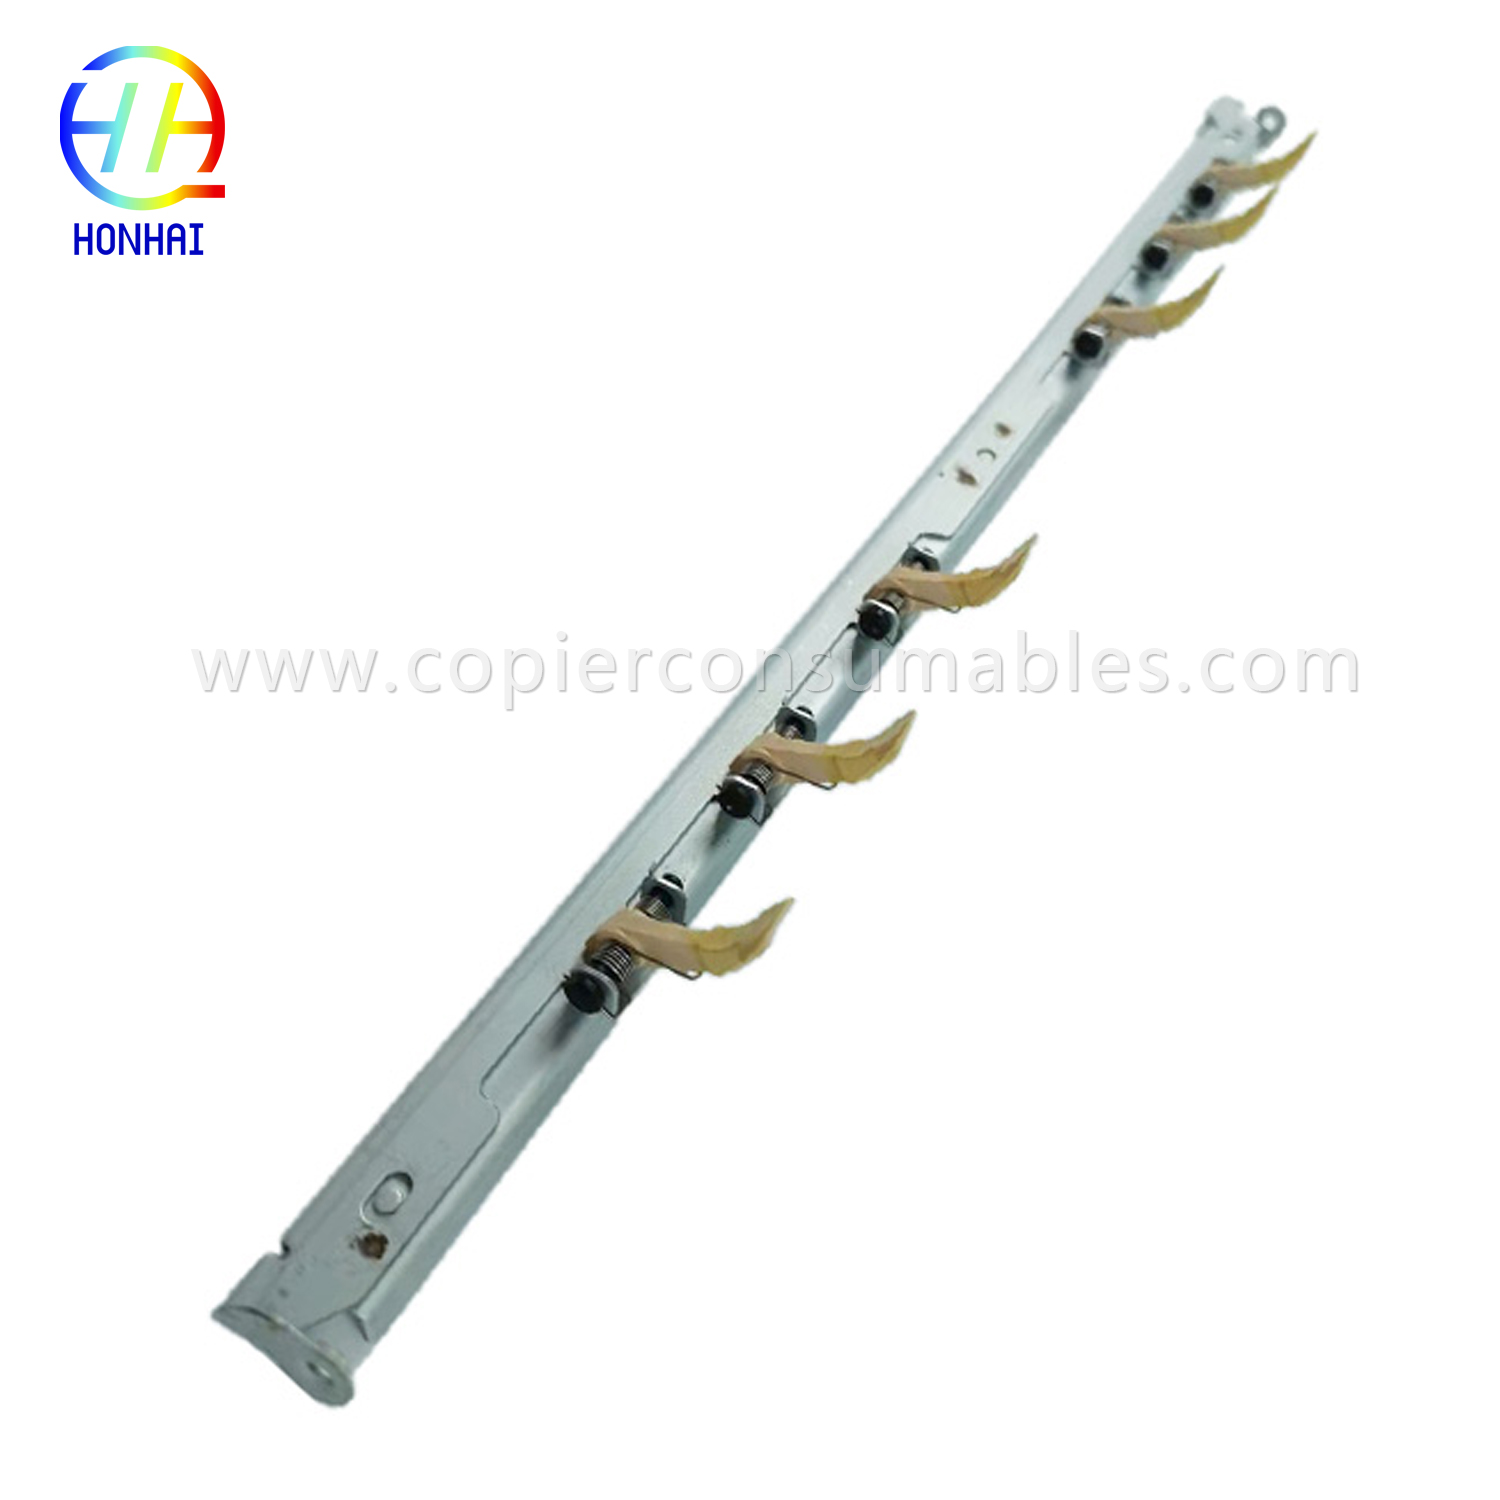 Pickup Finger  for Upper fuser Pickup Finger & Separate Claws High Quality & Long Life for Xerox 4110  019K98743 (4) 拷贝